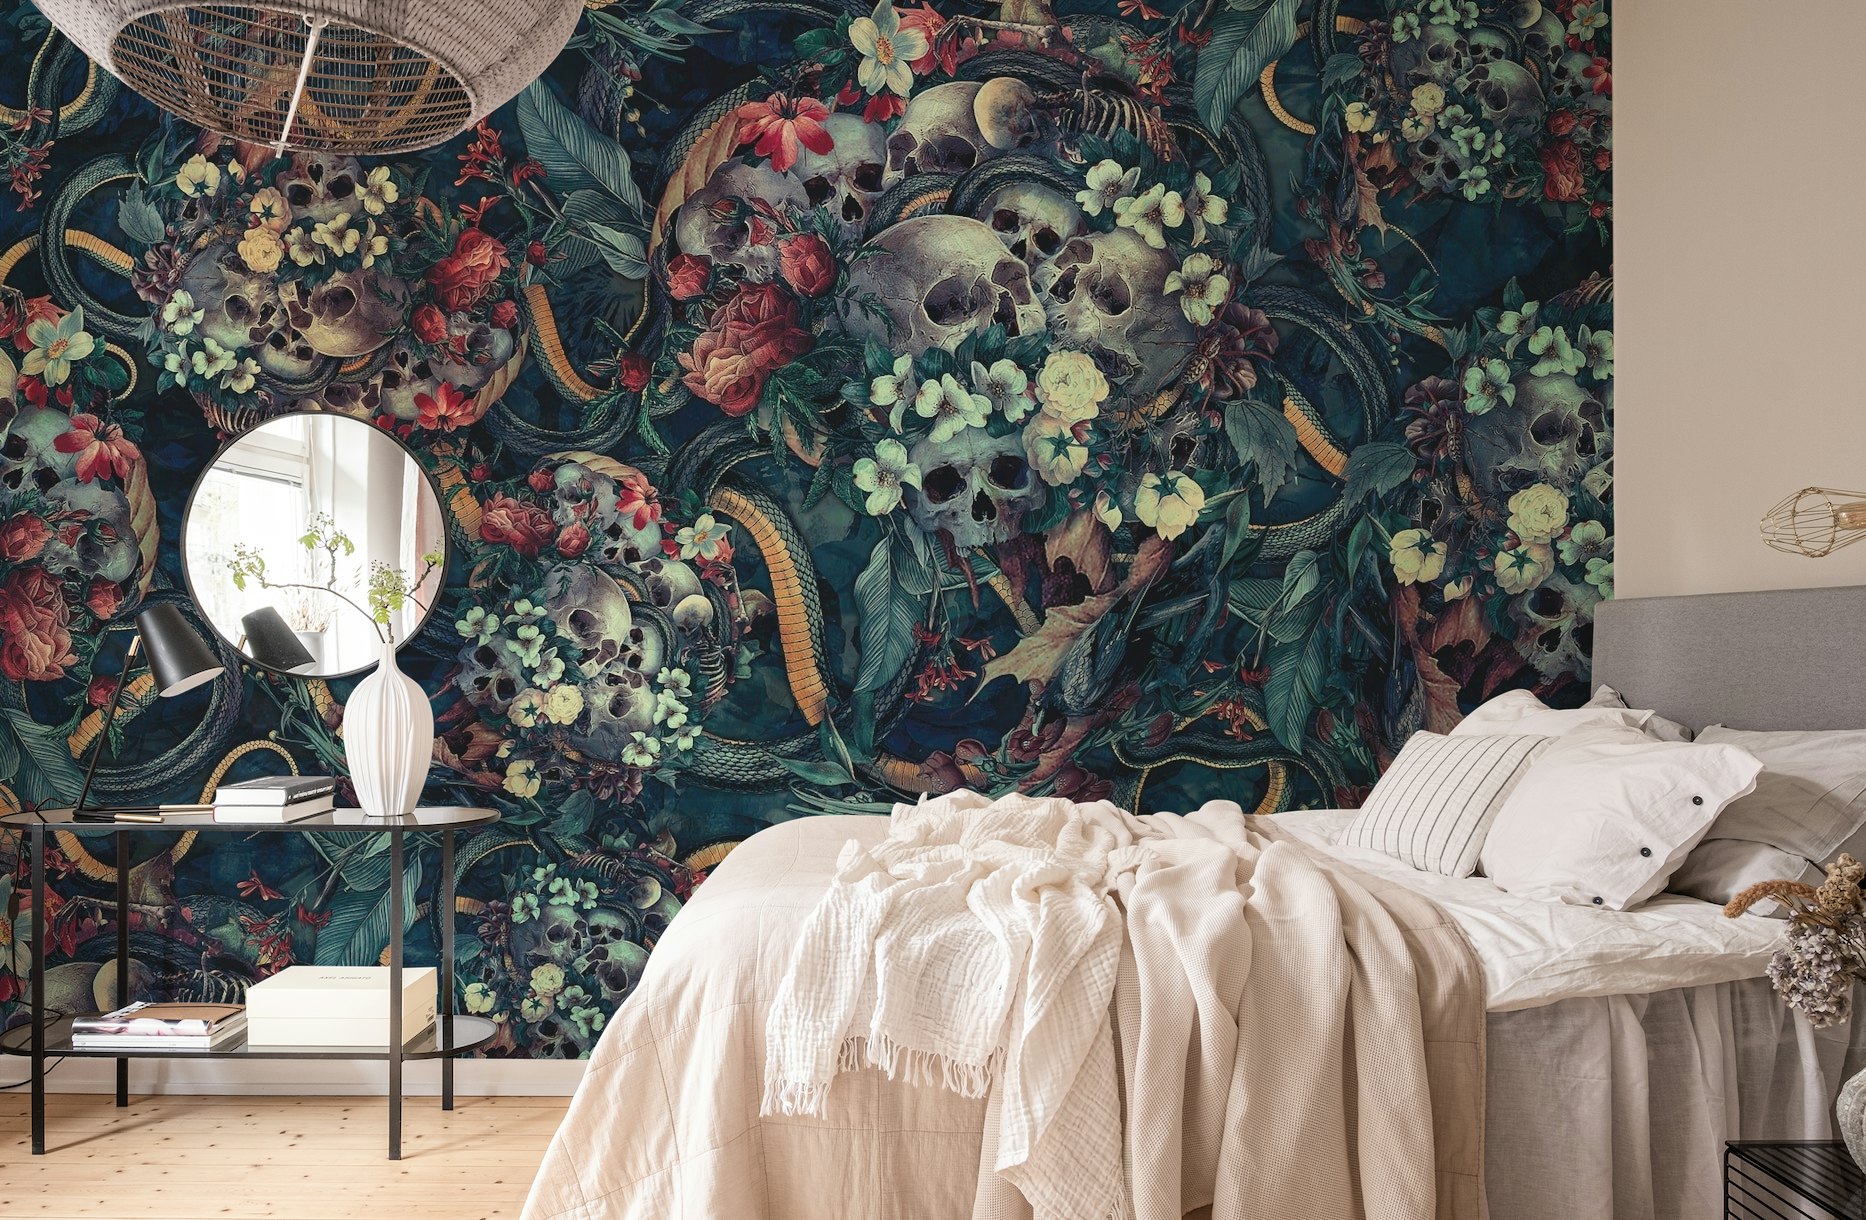 High-quality wall mural featuring a unique, stylish skull and snake design